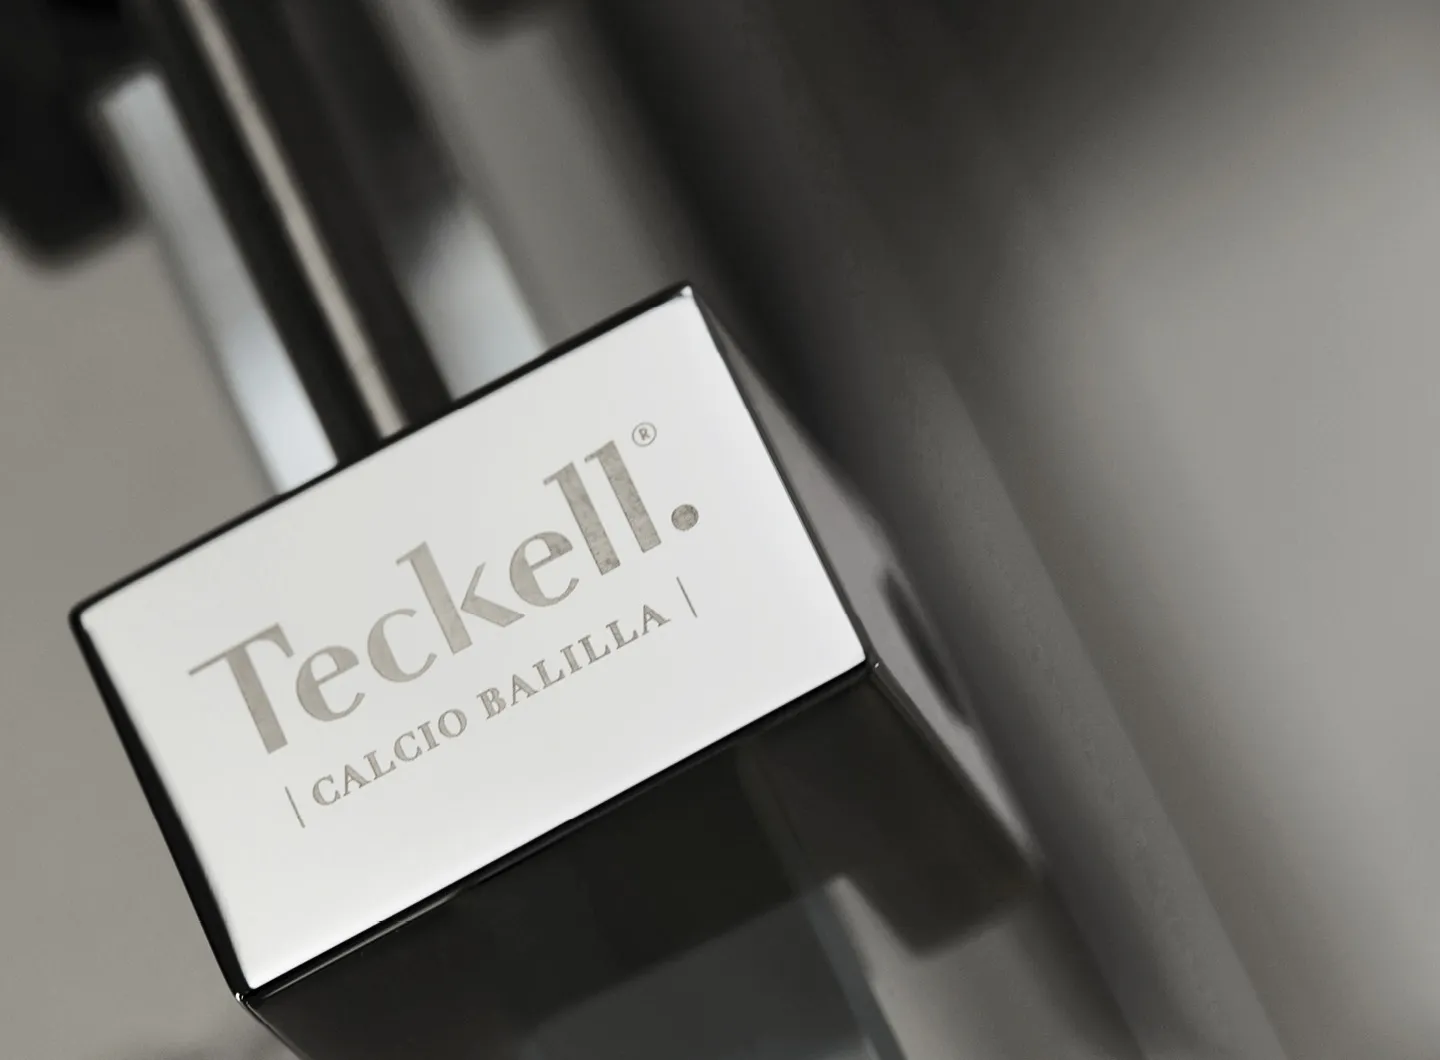 Each Teckell masterpiece has its own pedigree.